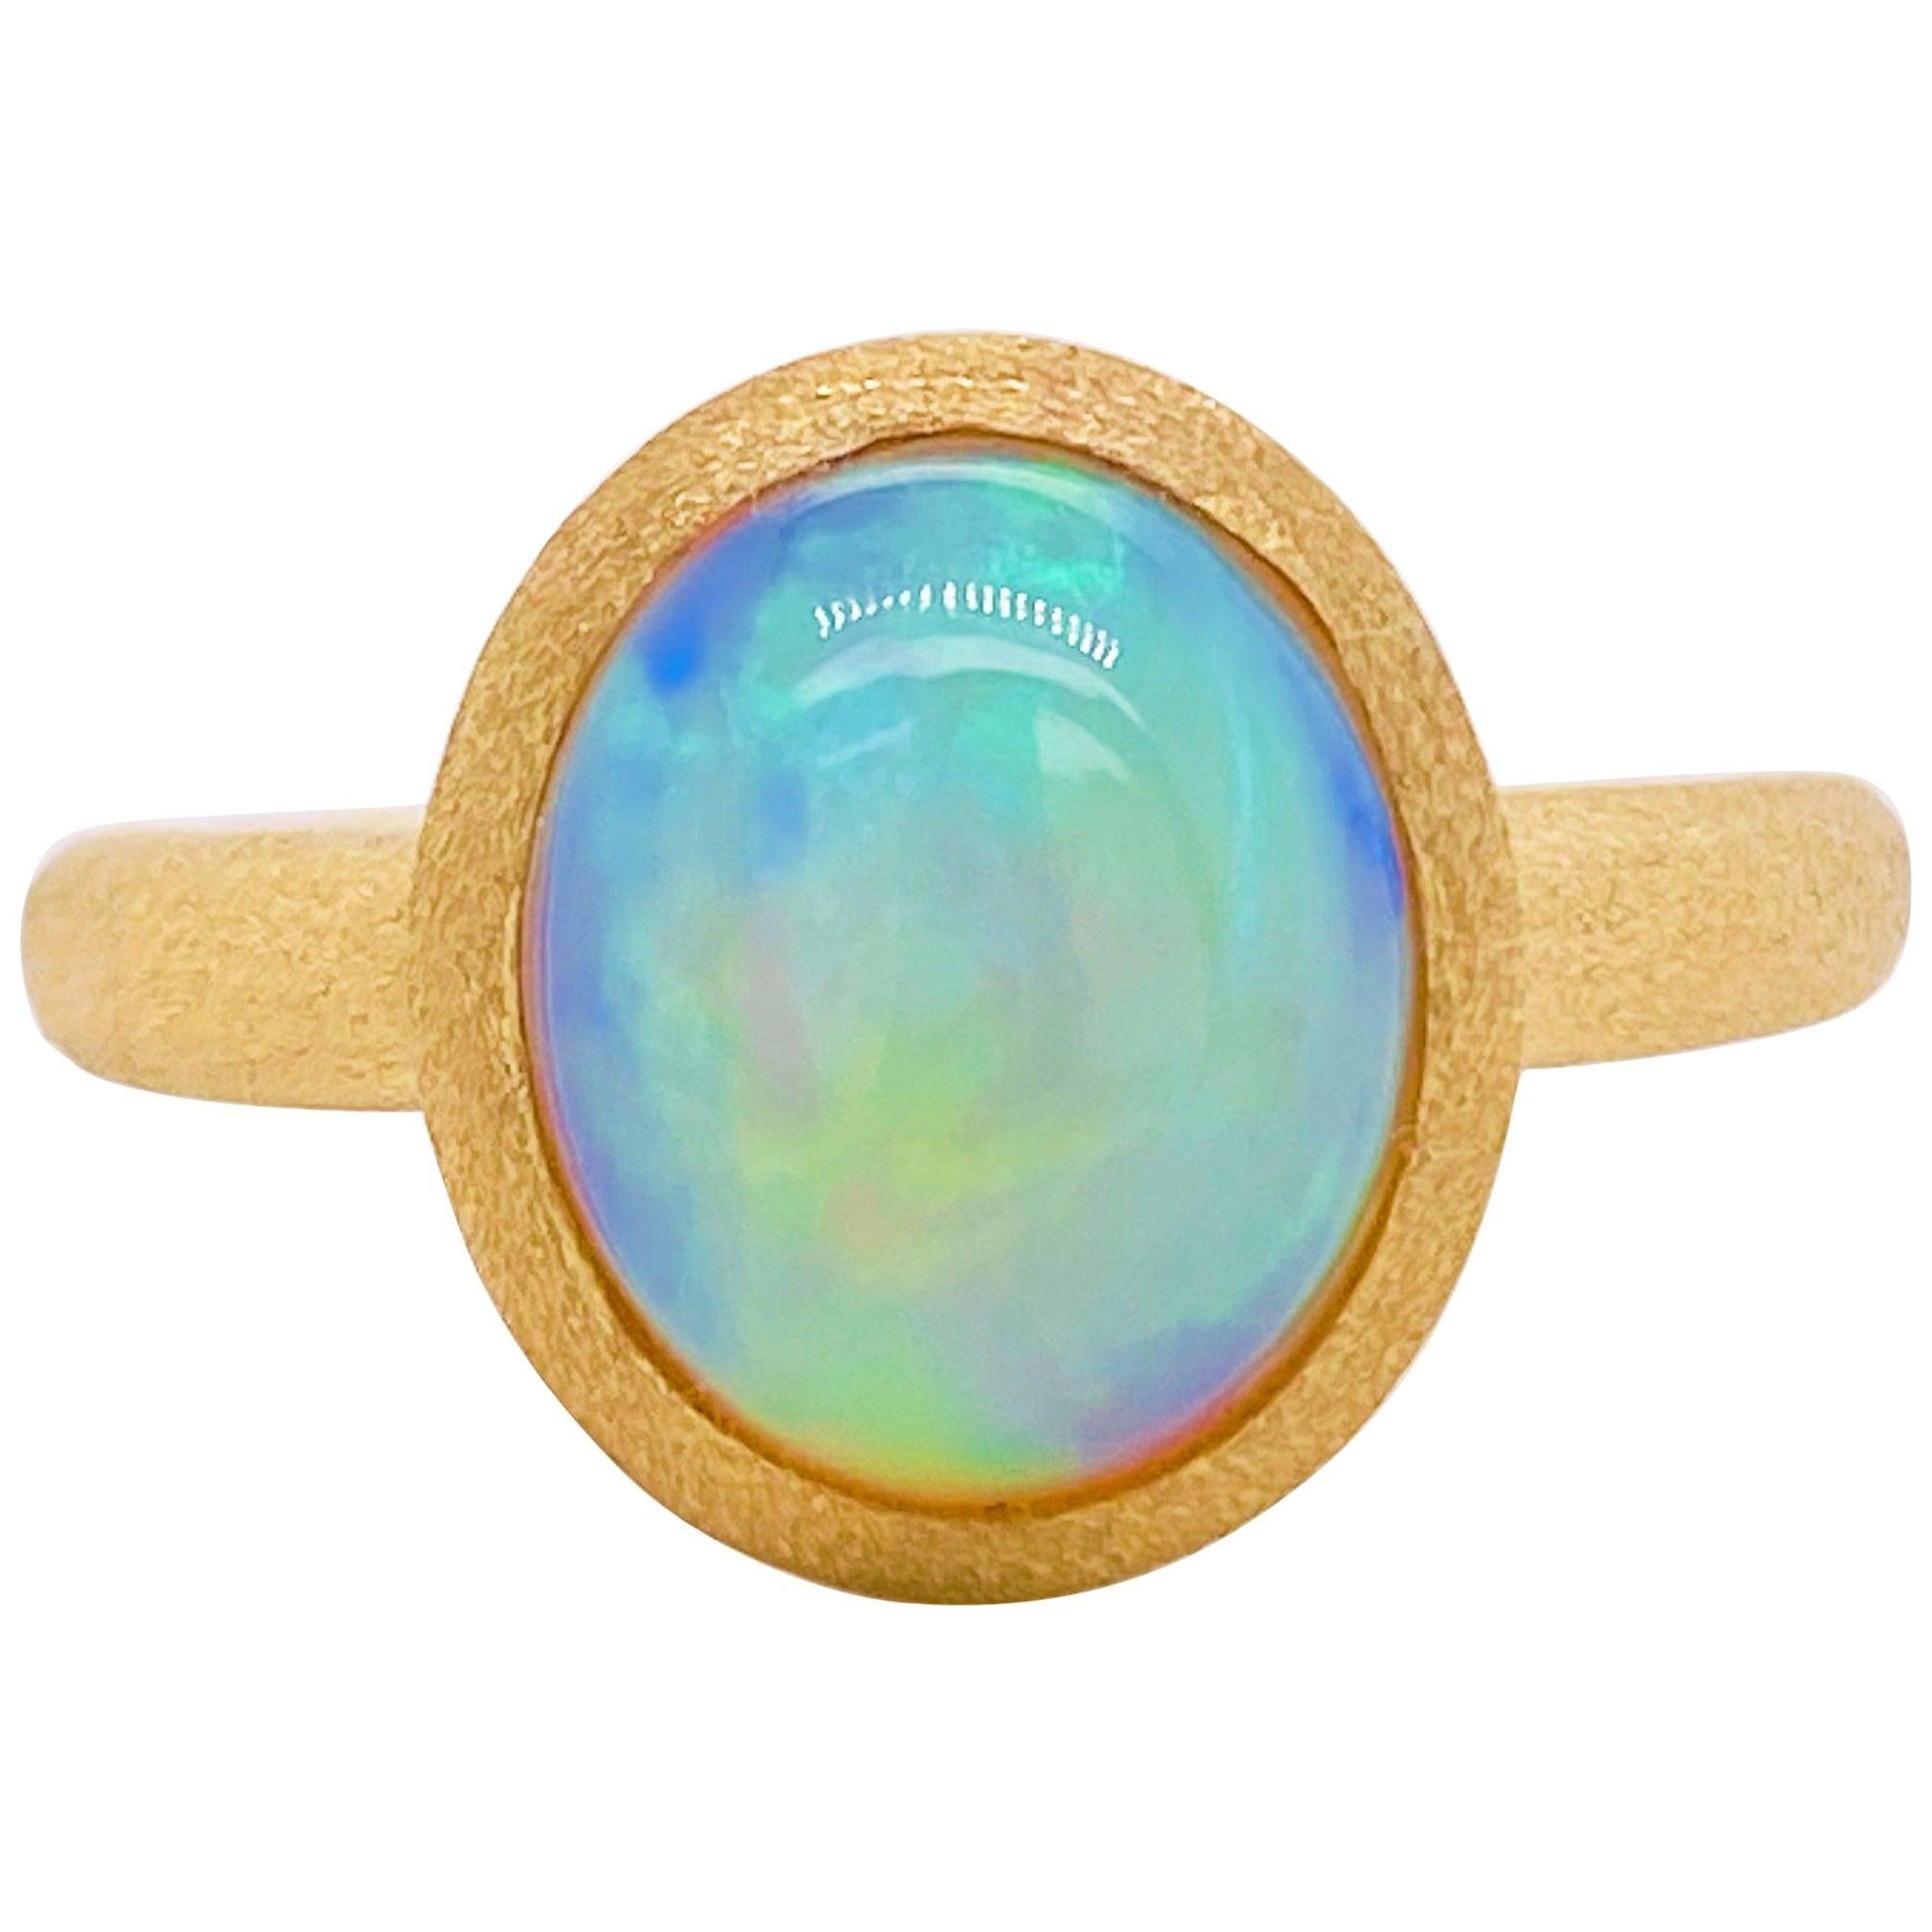 Australian Opal 2.29cts, Brush Finish 18K Yellow Gold, Oval Bezel Solitaire Ring